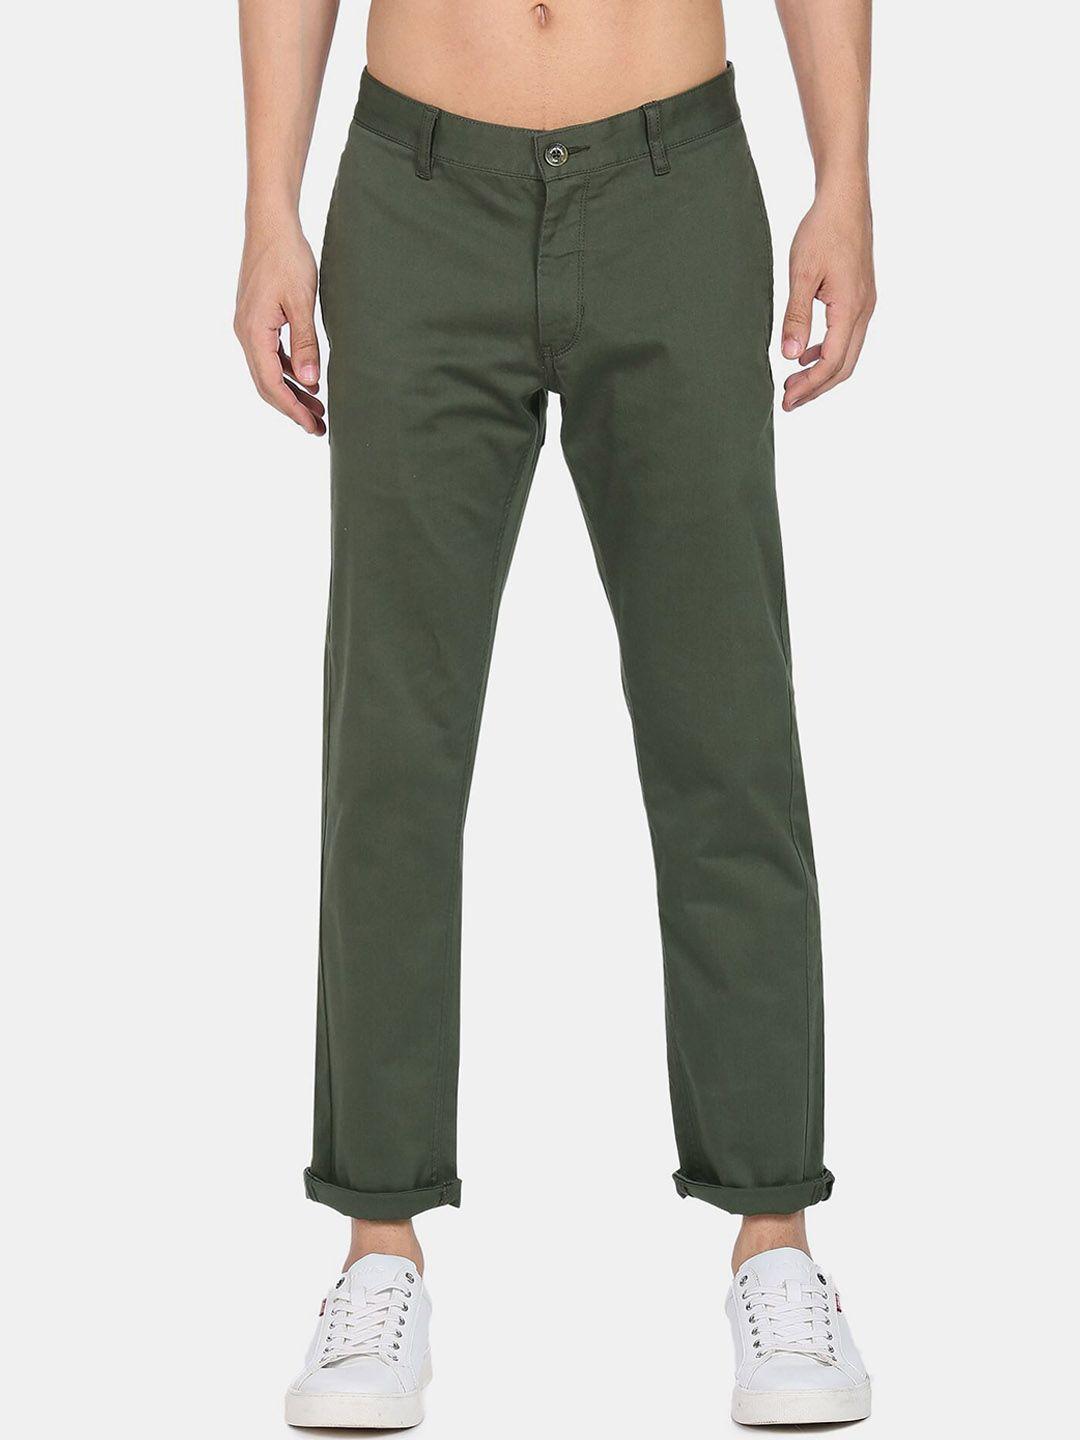 flying-machine-men-green-cotton-slim-fit-chinos-trousers